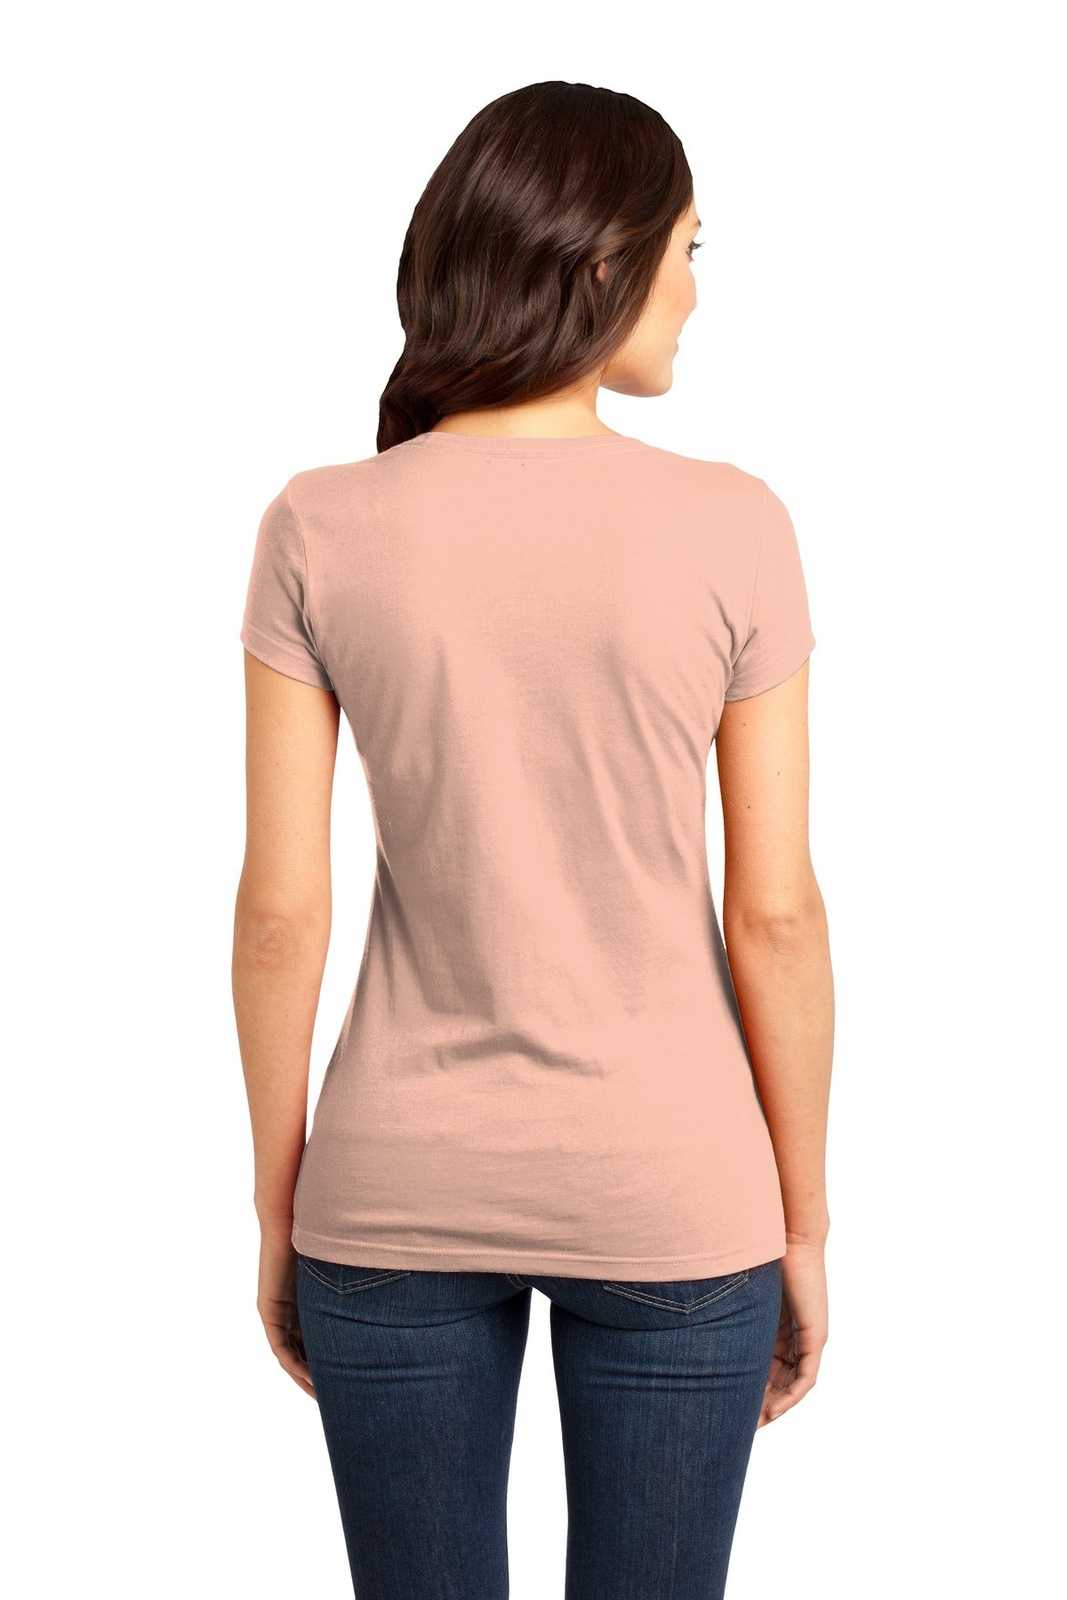 District DT6001 Women's Fitted Very Important Tee - Dusty Peach - HIT a Double - 1